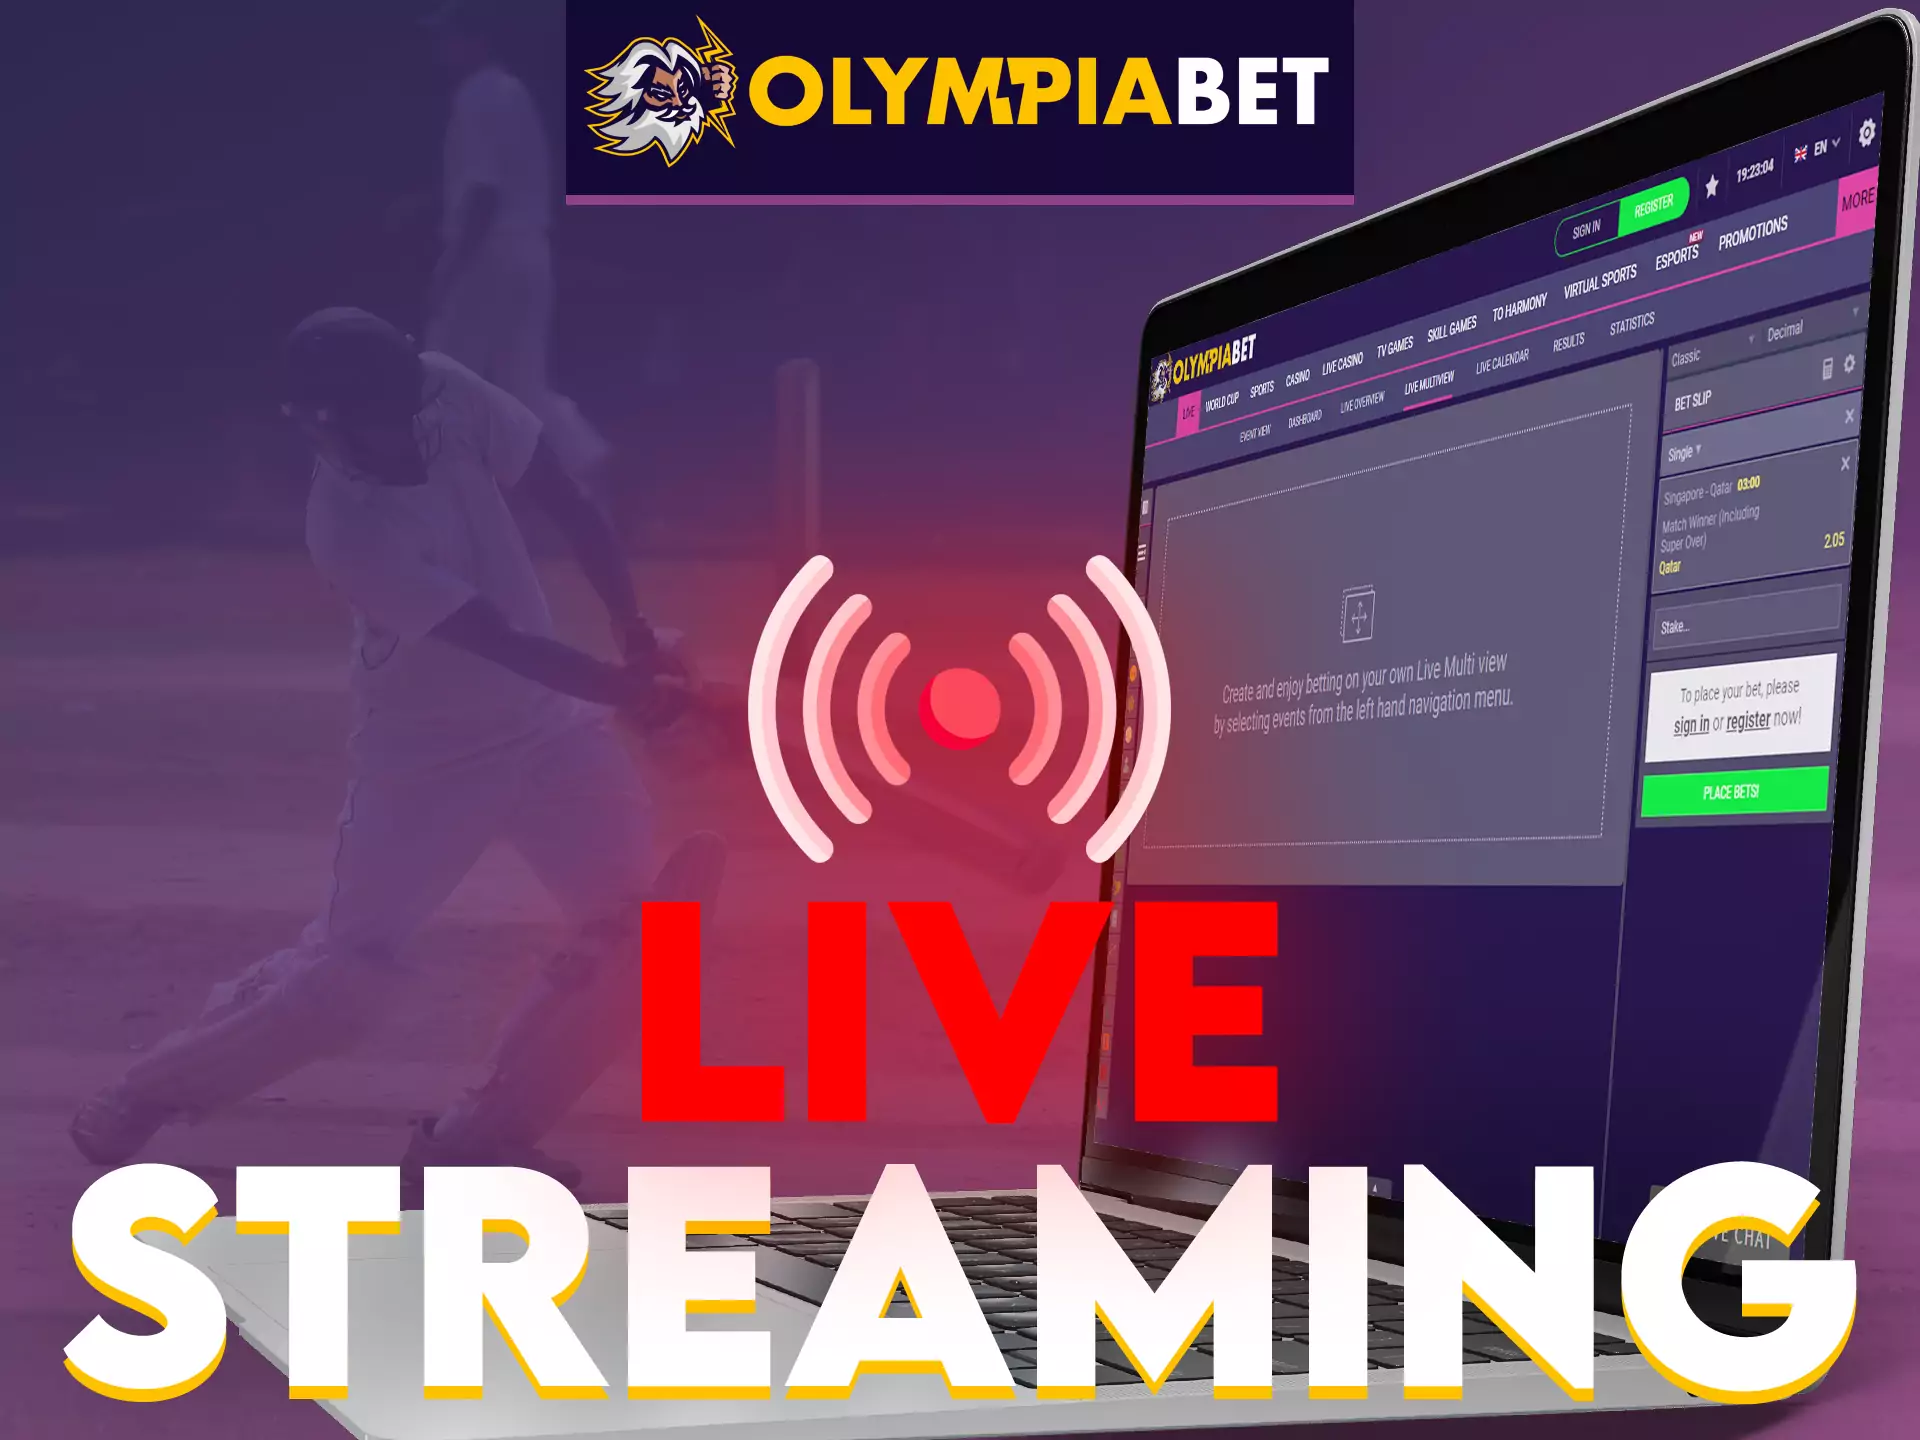 OlympiaBet offers a platform for live streaming!